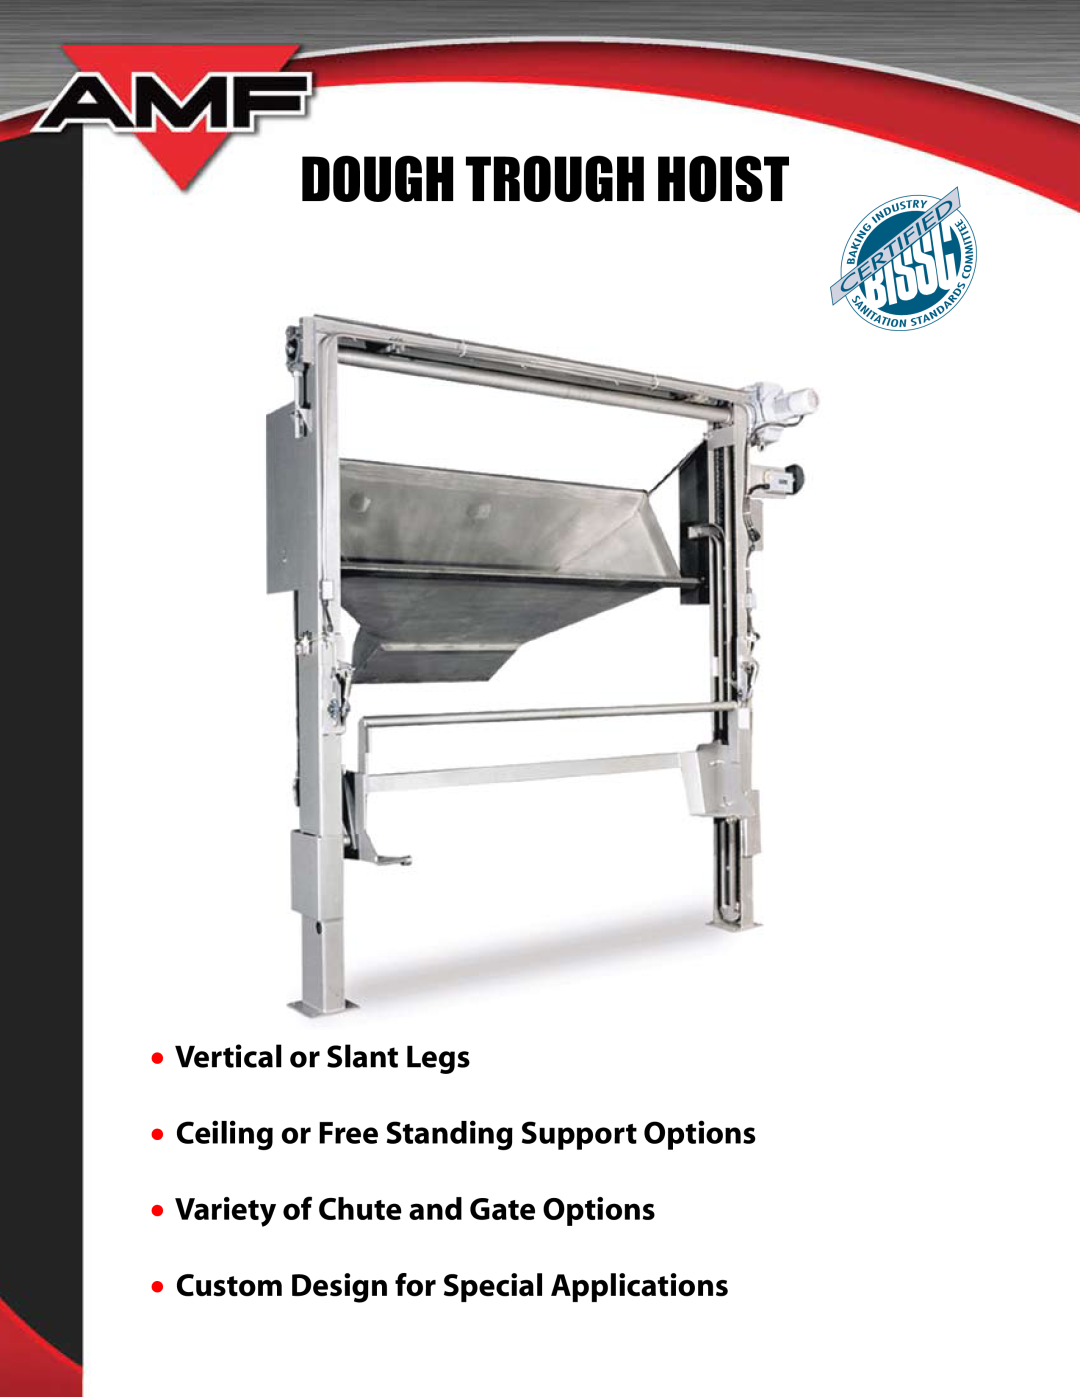 AMF Dough Trough Hoist manual Vertical or Slant Legs, Ceiling or Free Standing Support Options 